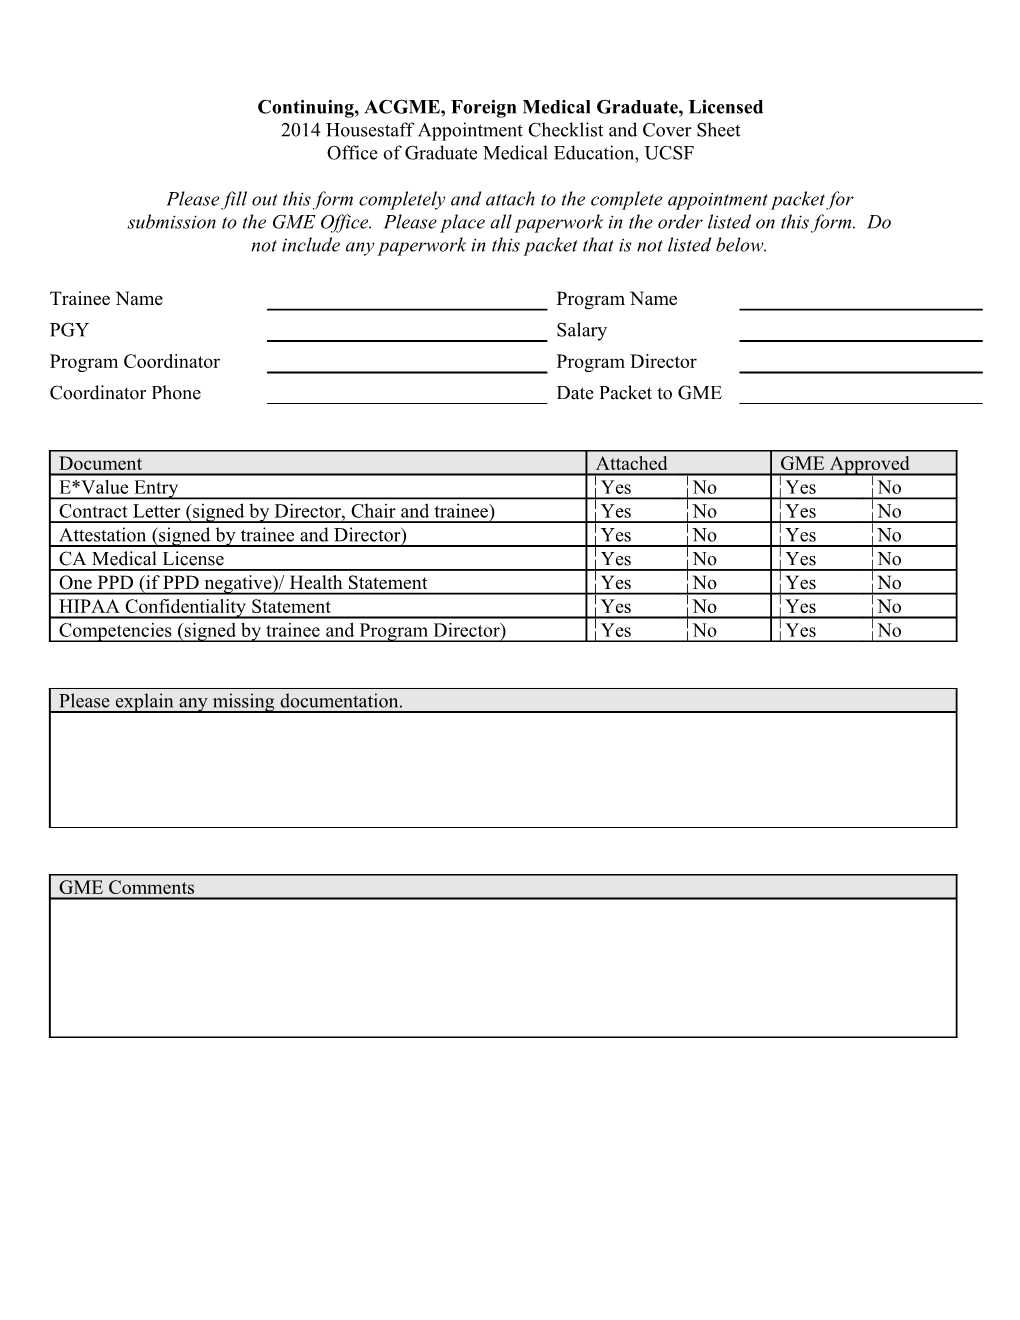 2007 UCSF Housestaff Appointment Checklist and Cover Sheet s1